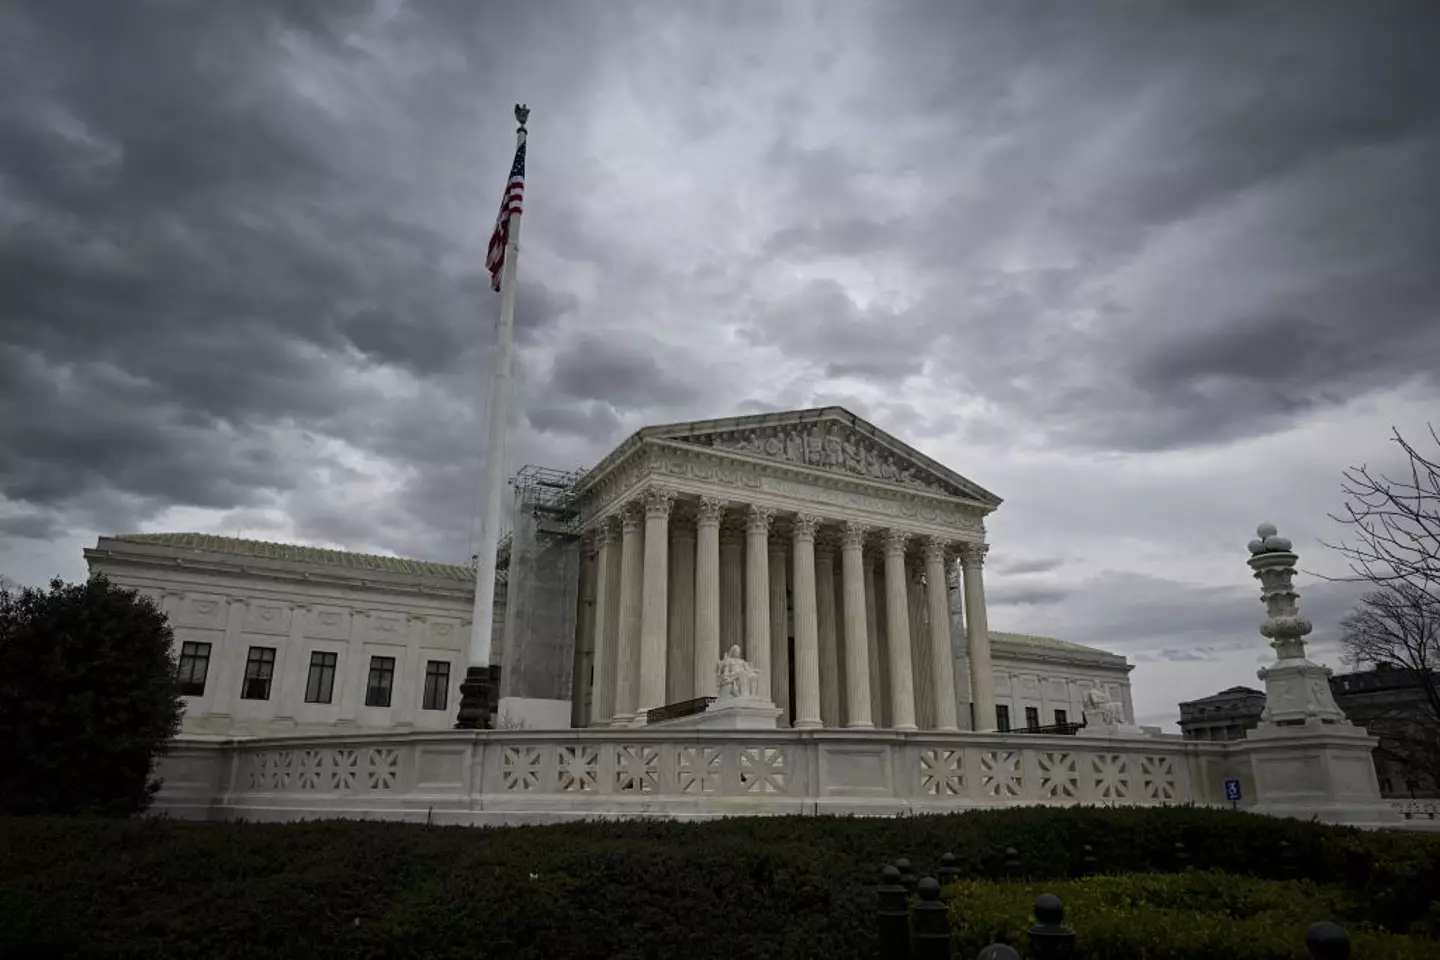 The Supreme Court rejected Dorsey's appeal. (Celal Gunes/Anadolu via Getty Images)